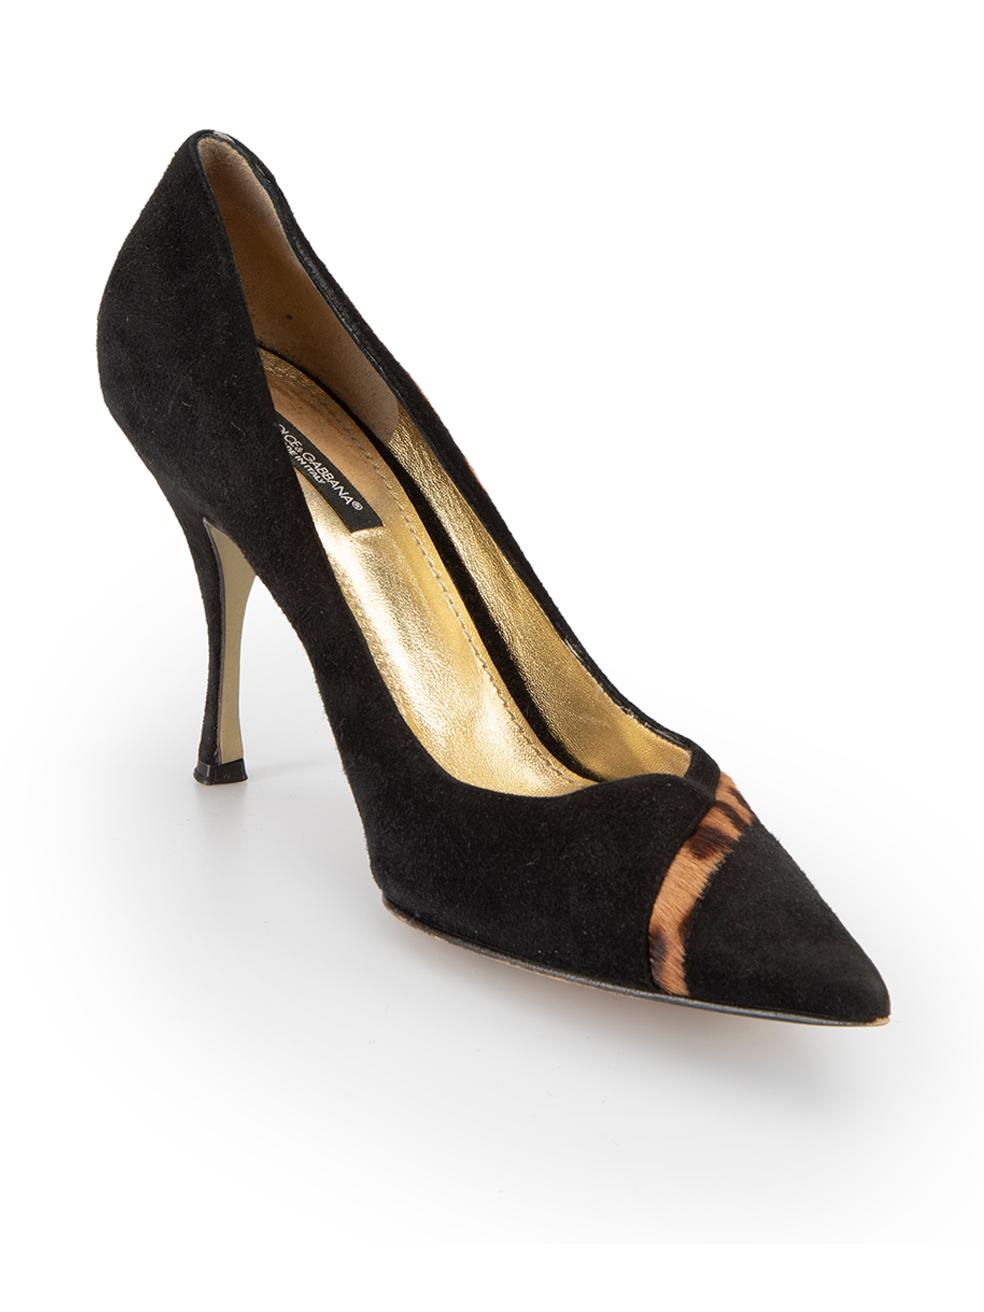 CONDITION is Very good. Minimal wear to shoes is evident. Minimal wear to both heels and the right-side of the left shoe with scuffs on this used Dolce & Gabbana designer resale item. 



Details


Black and brown

Suede and pony hair calfskin

Slip